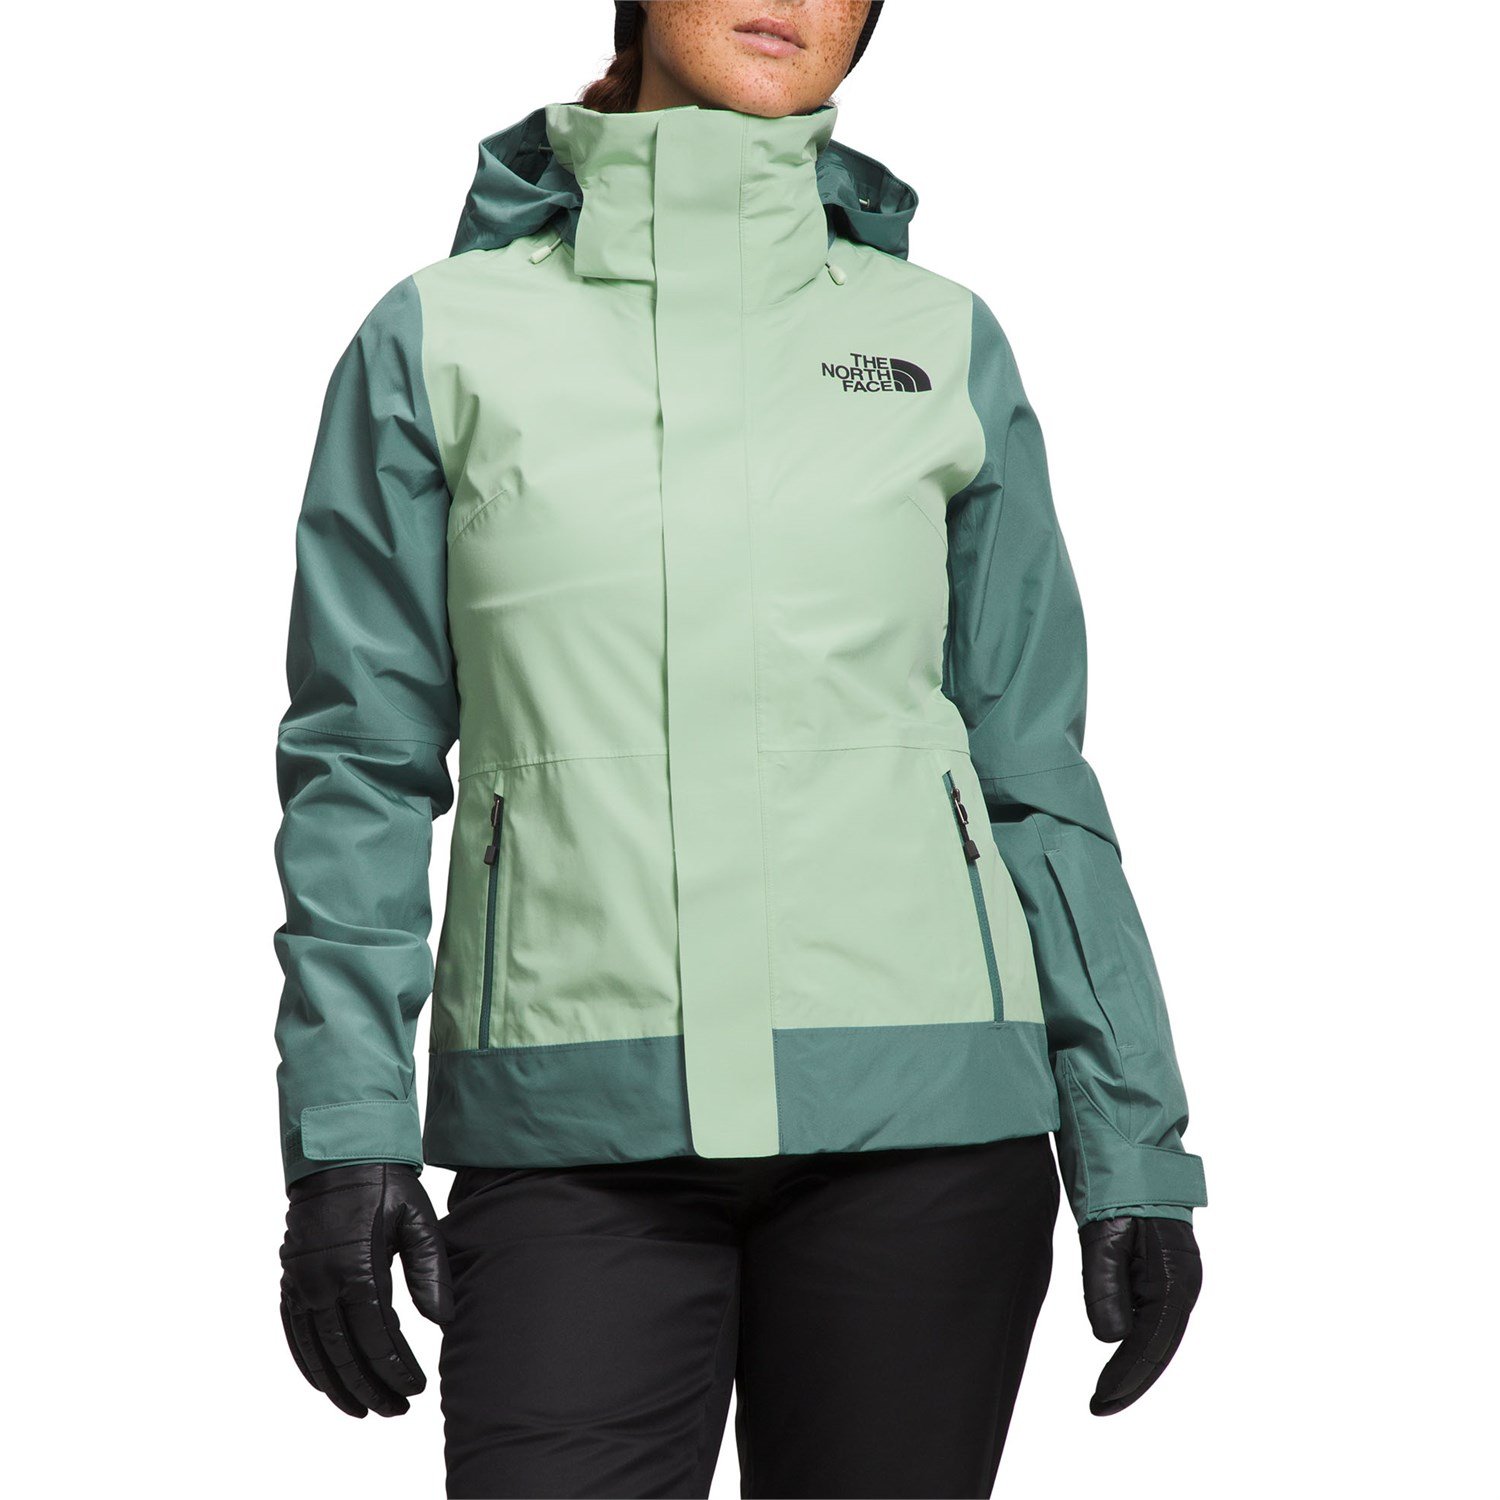 The North Face Garner Triclimate® Jacket   Women's   evo Canada